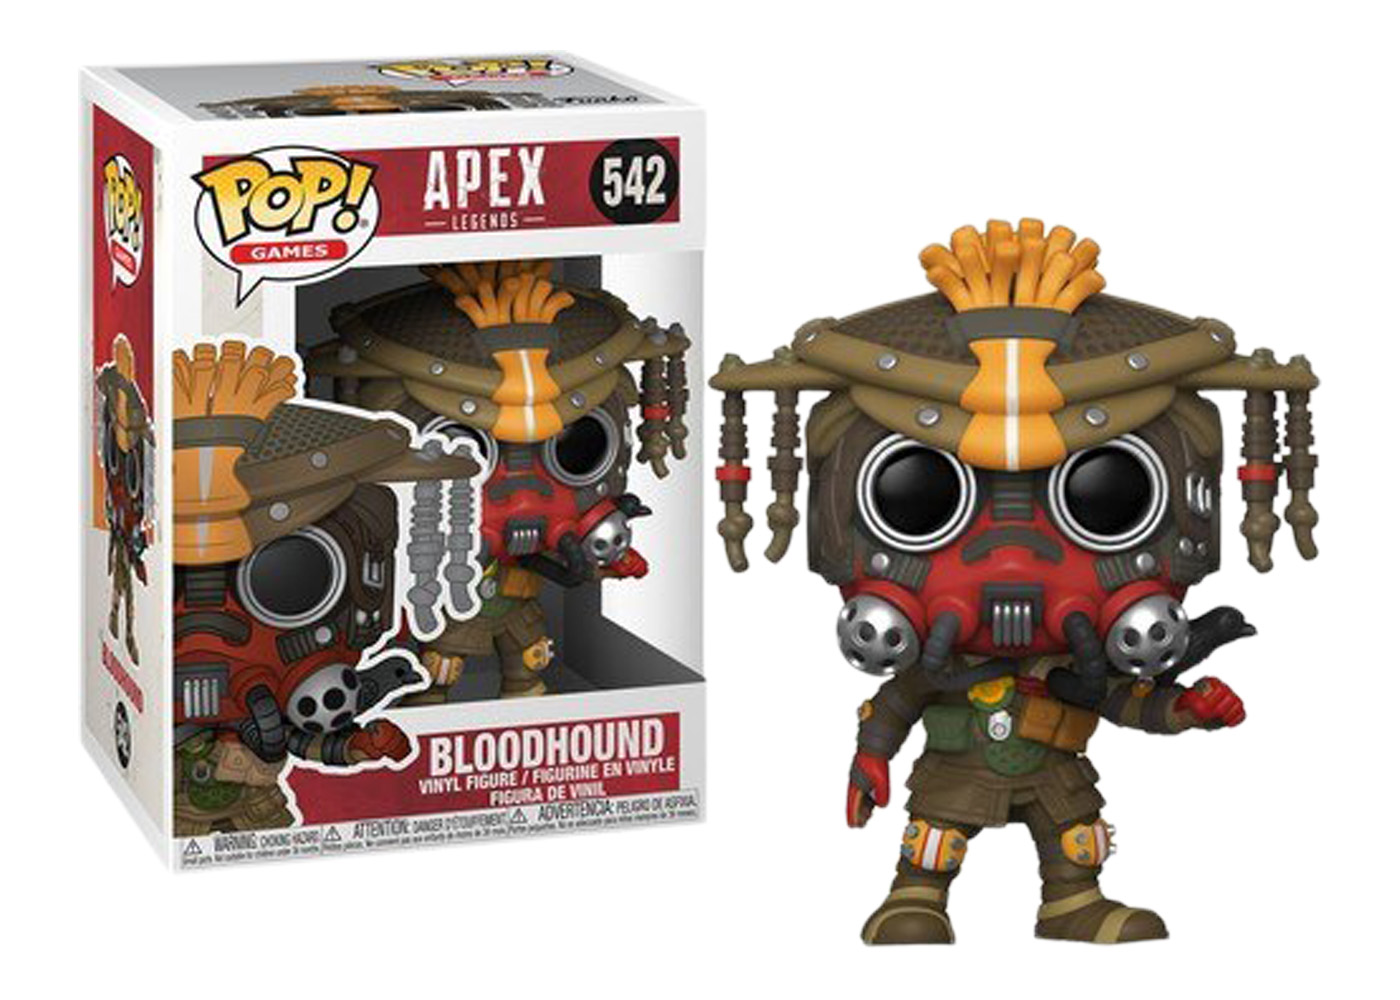 NEW OFFICIAL FUNKO POP GAMES APEX LEGENDS BLOODHOUND COLLECTABLE FIGURE 